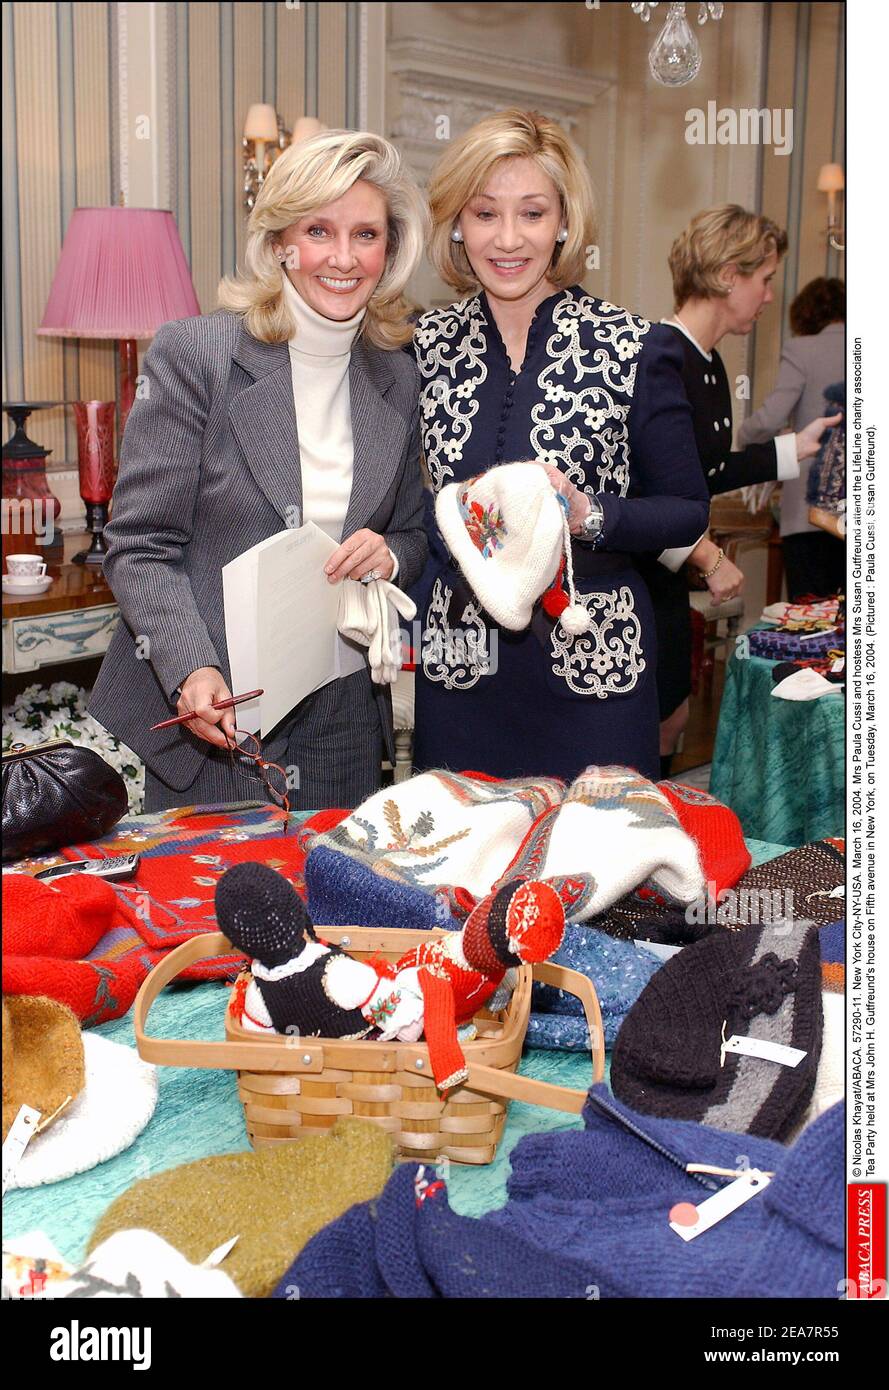 © Nicolas Khayat/ABACA. 57290-11. New York City-NY-USA. March 16, 2004. Mrs Paula Cussi and hostess Mrs Susan Gutfreund attend the LifeLine charity association Tea Party held at Mrs John H. Gutfreund's house on Fifth avenue in New York, on Tuesday, March 16, 2004. (Pictured : Paula Cussi, Susan Gutfreund). Stock Photo